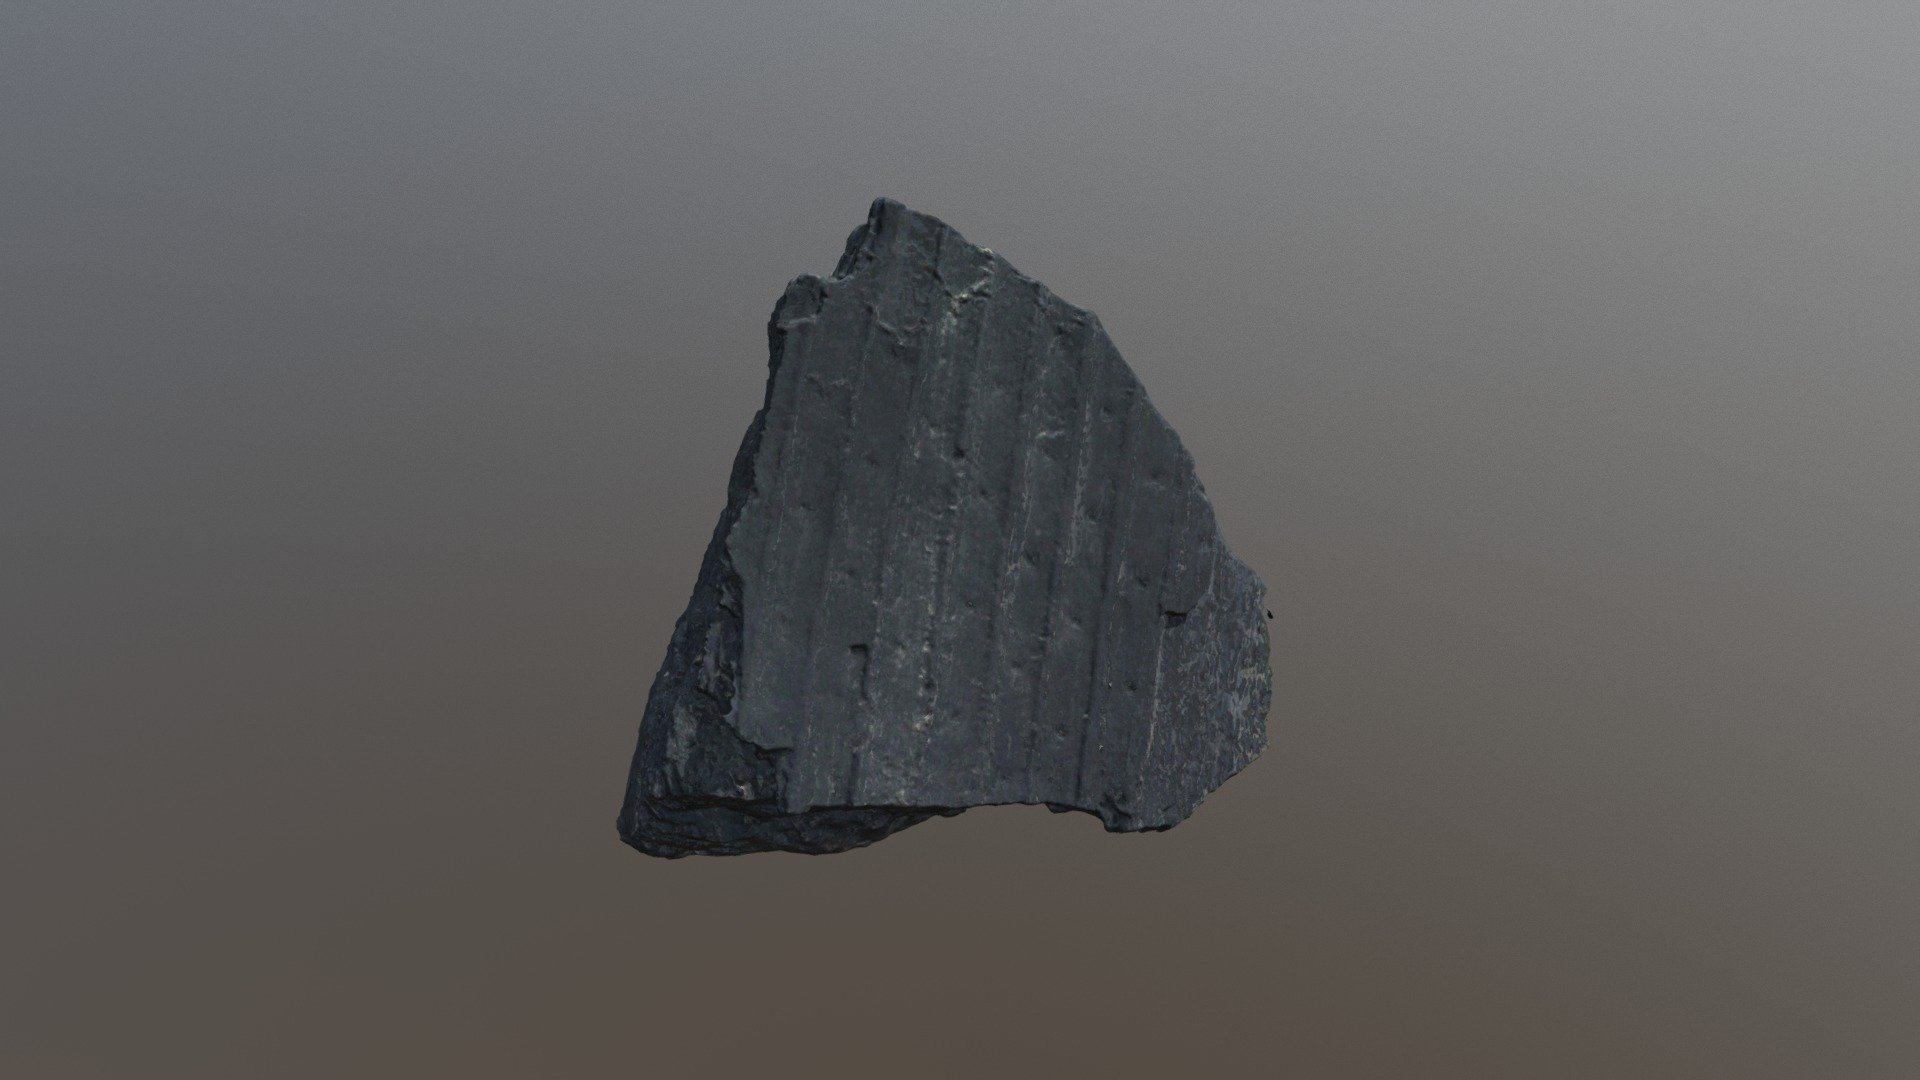 Lepidodendron fossil (VCU_3D_3005)